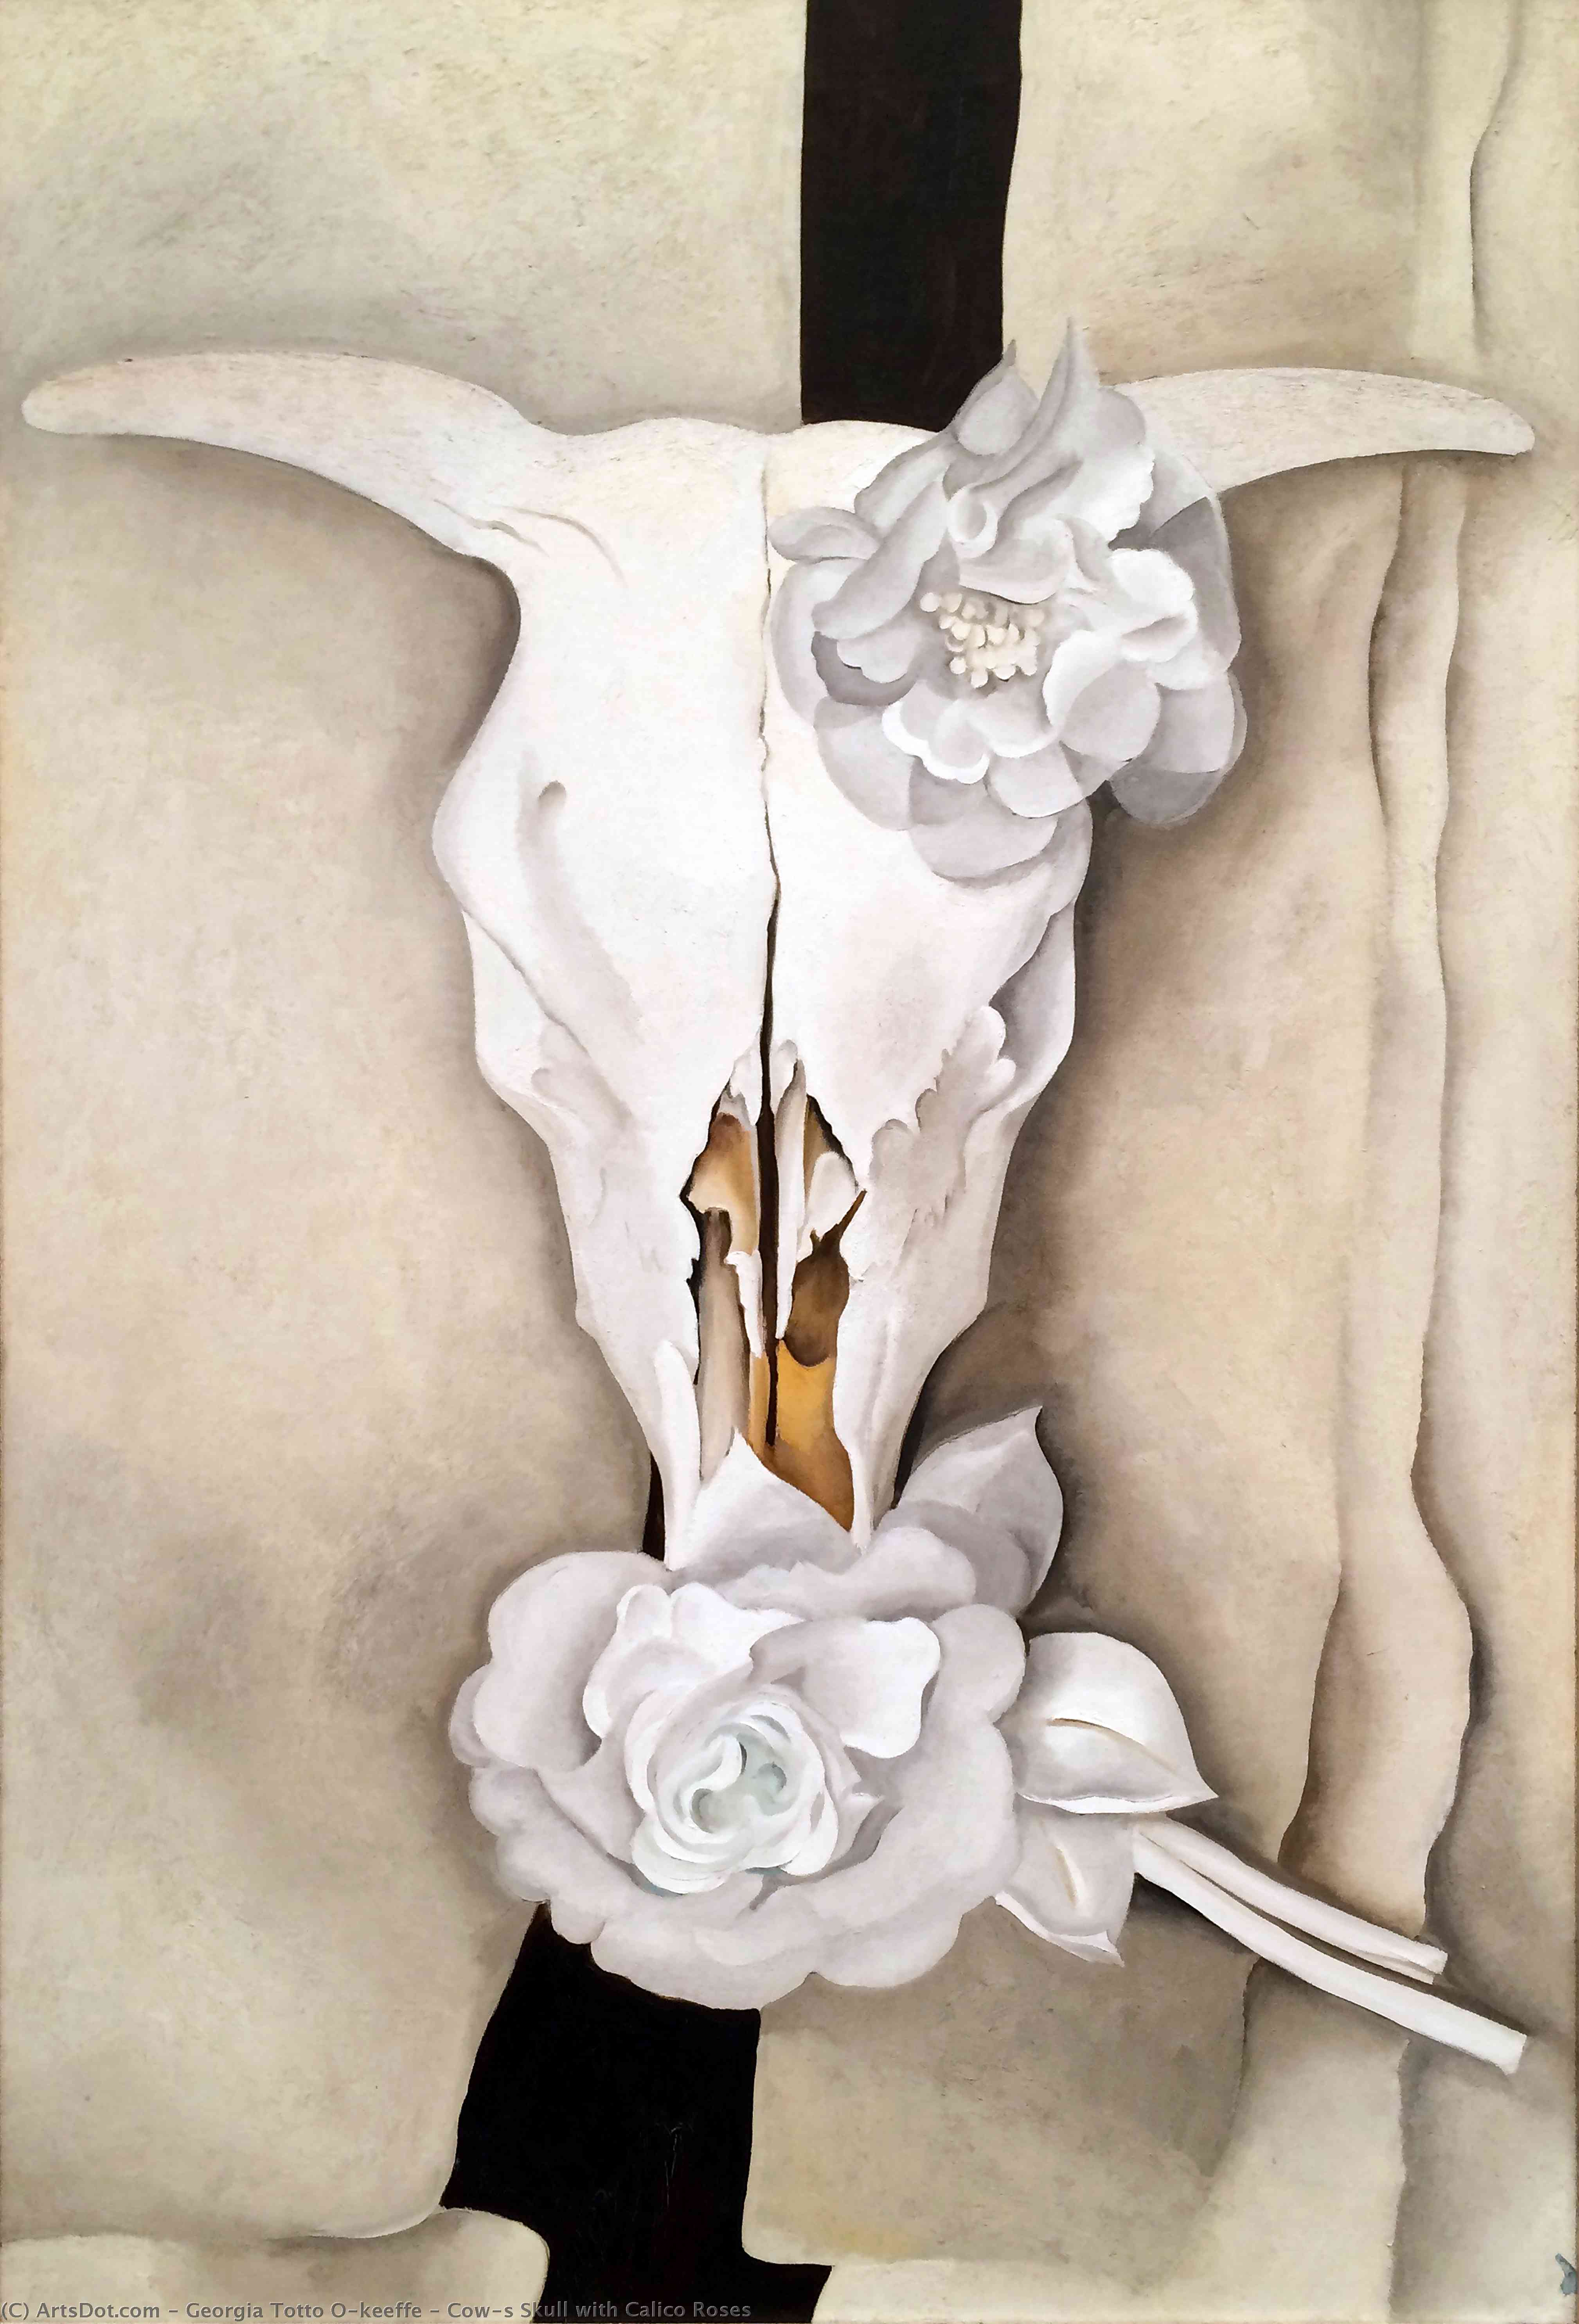 WikiOO.org - Encyclopedia of Fine Arts - Målning, konstverk Georgia Totto O'keeffe - Cow's Skull with Calico Roses